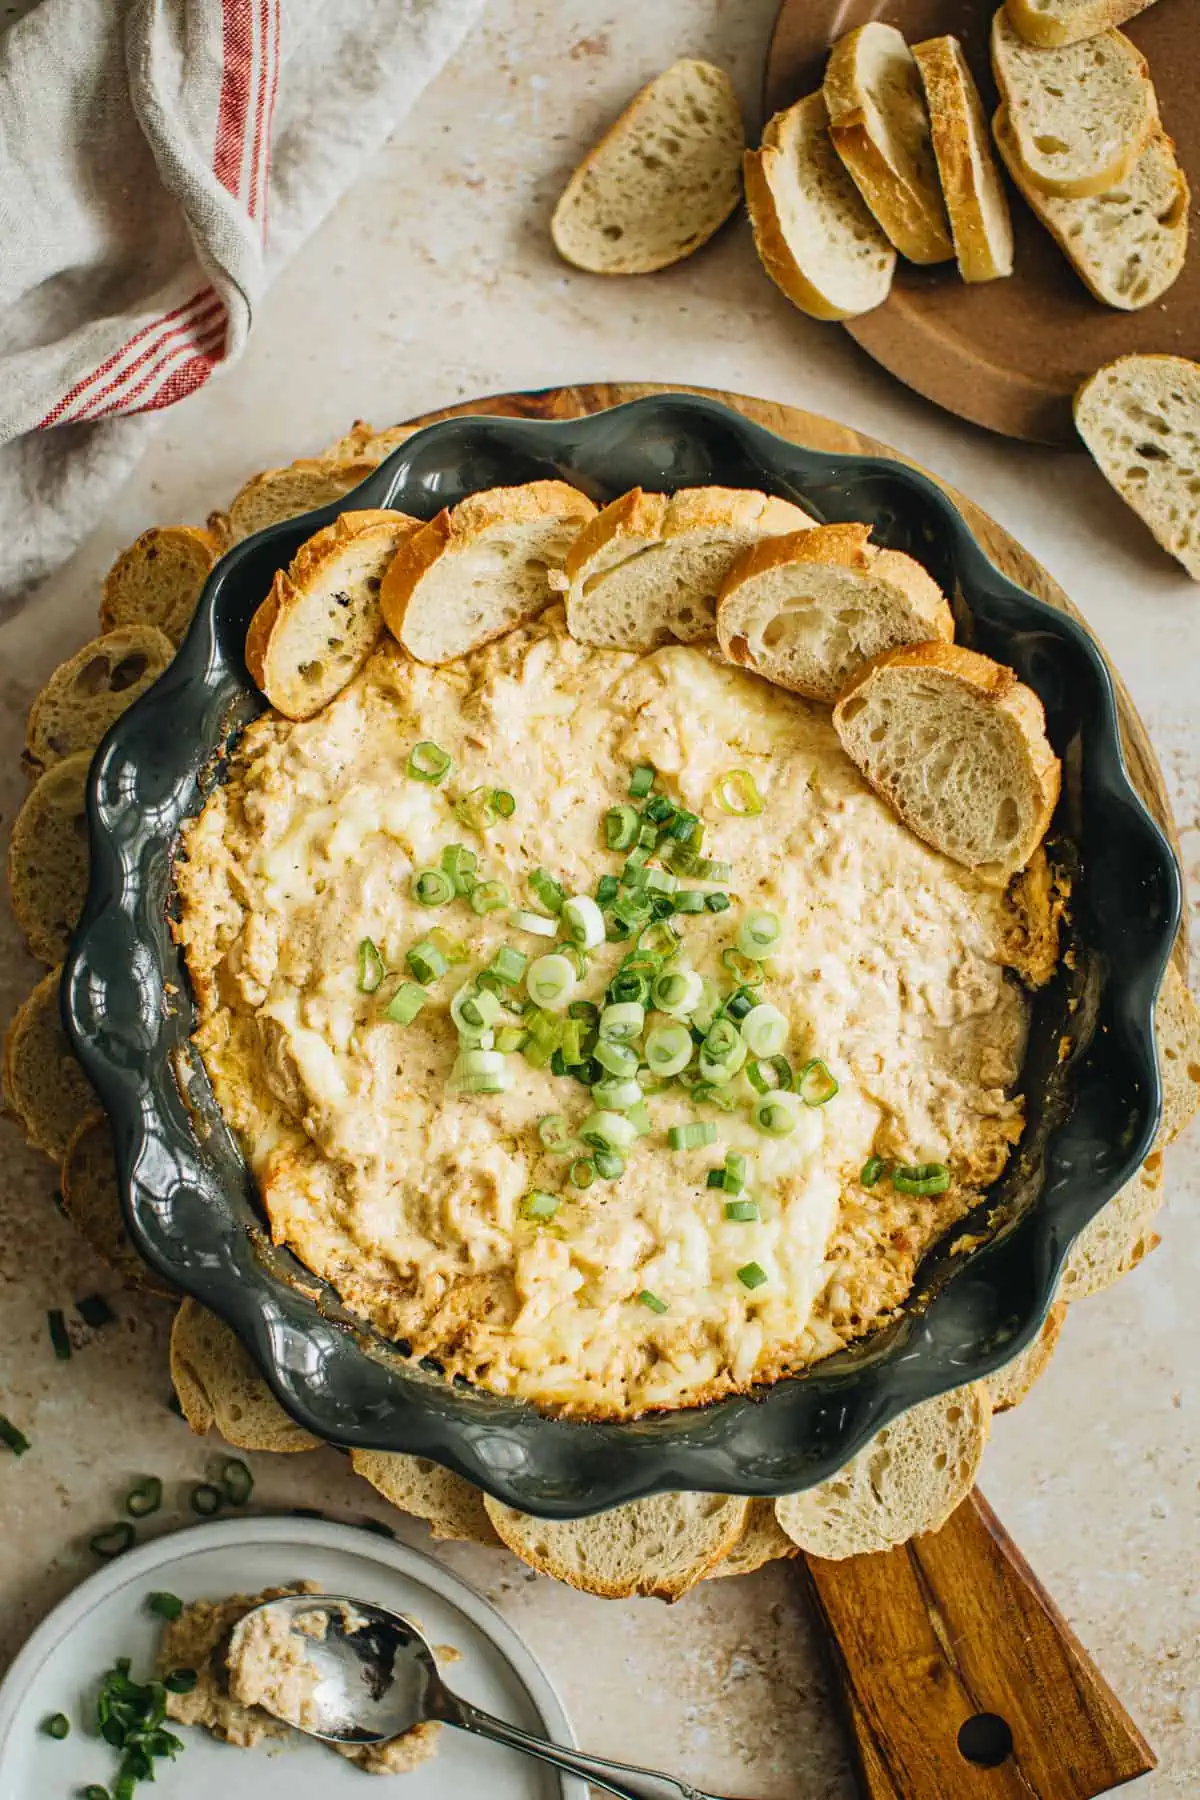 Crab dip in a pie dish topped with green onions and surrounded by baguette pieces.